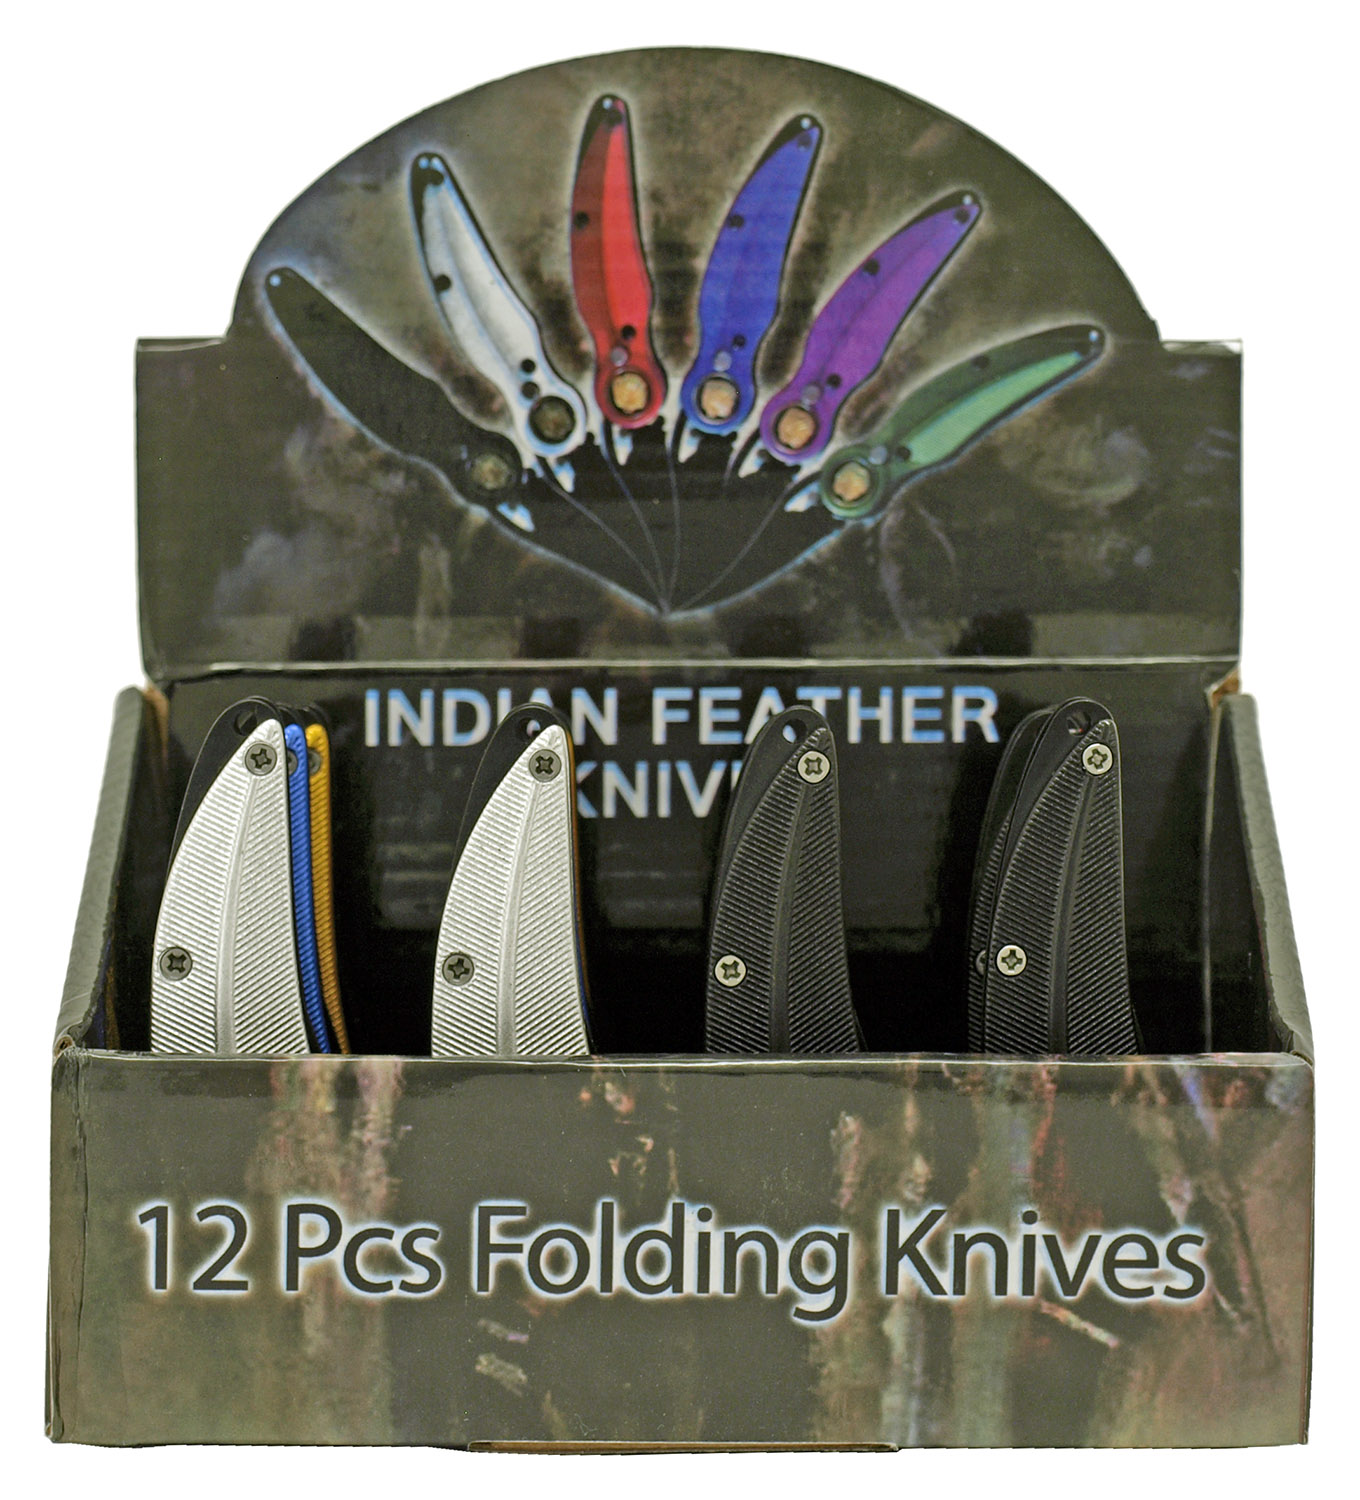 12 - pc. Indian Feather SWITCHBLADE Knife Set - Assorted Colors